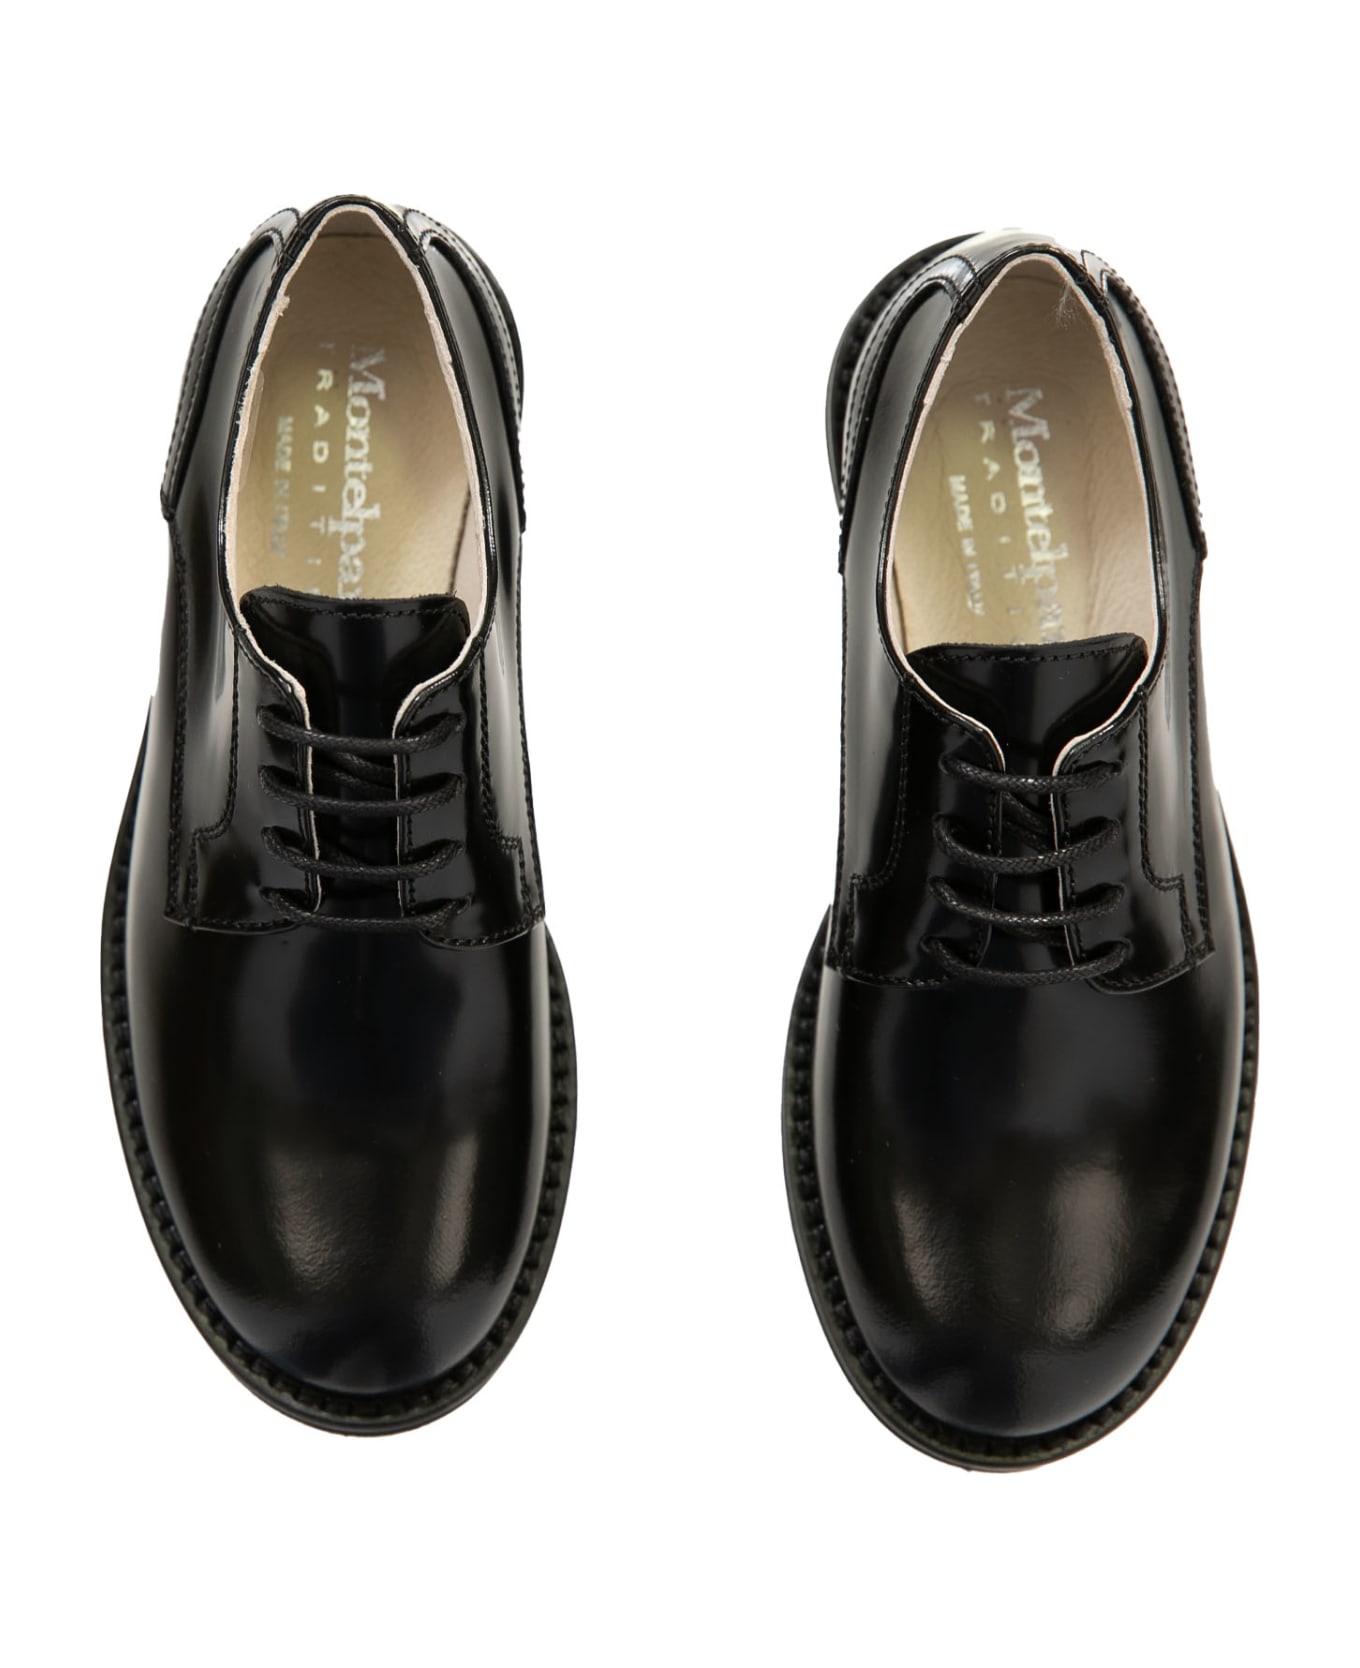 Andrea Montelpare Leather Shoes シューズ